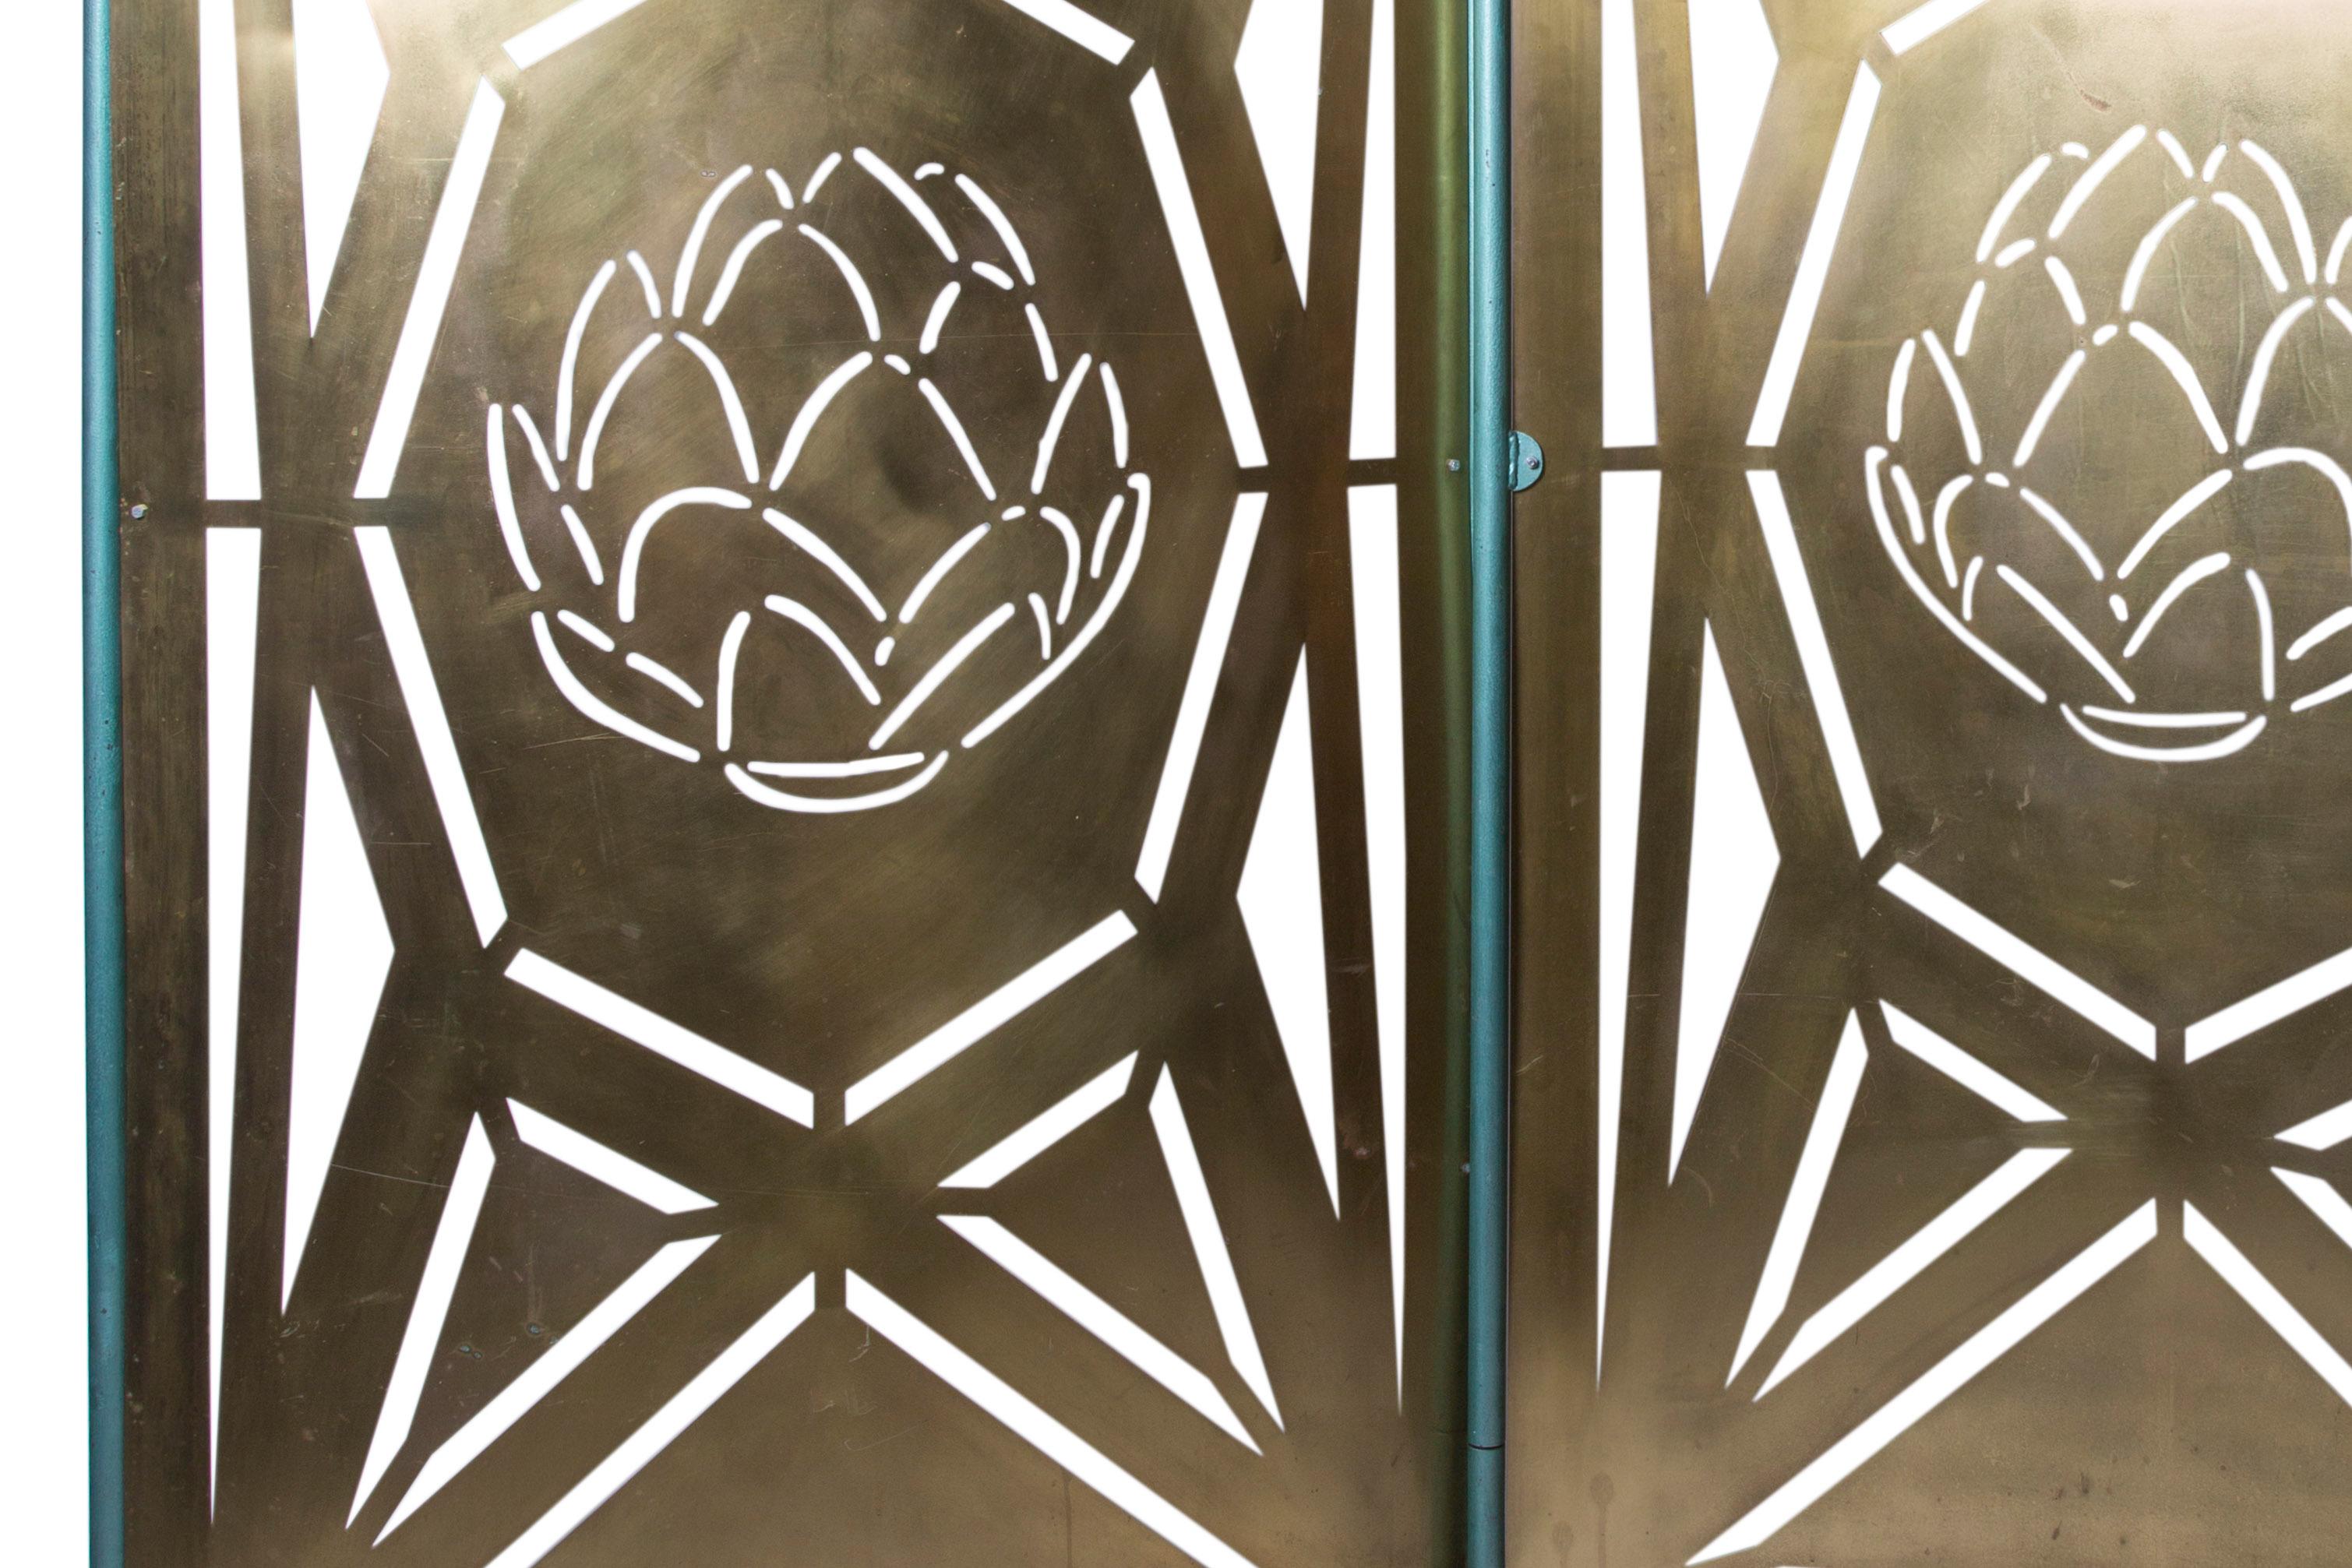 Pierced brass two fold screen or room divider in an industrial Brutalist manner with pierced stylised artichokes to centre of panels. Housed in its original industrial vernacular wheeled frame.